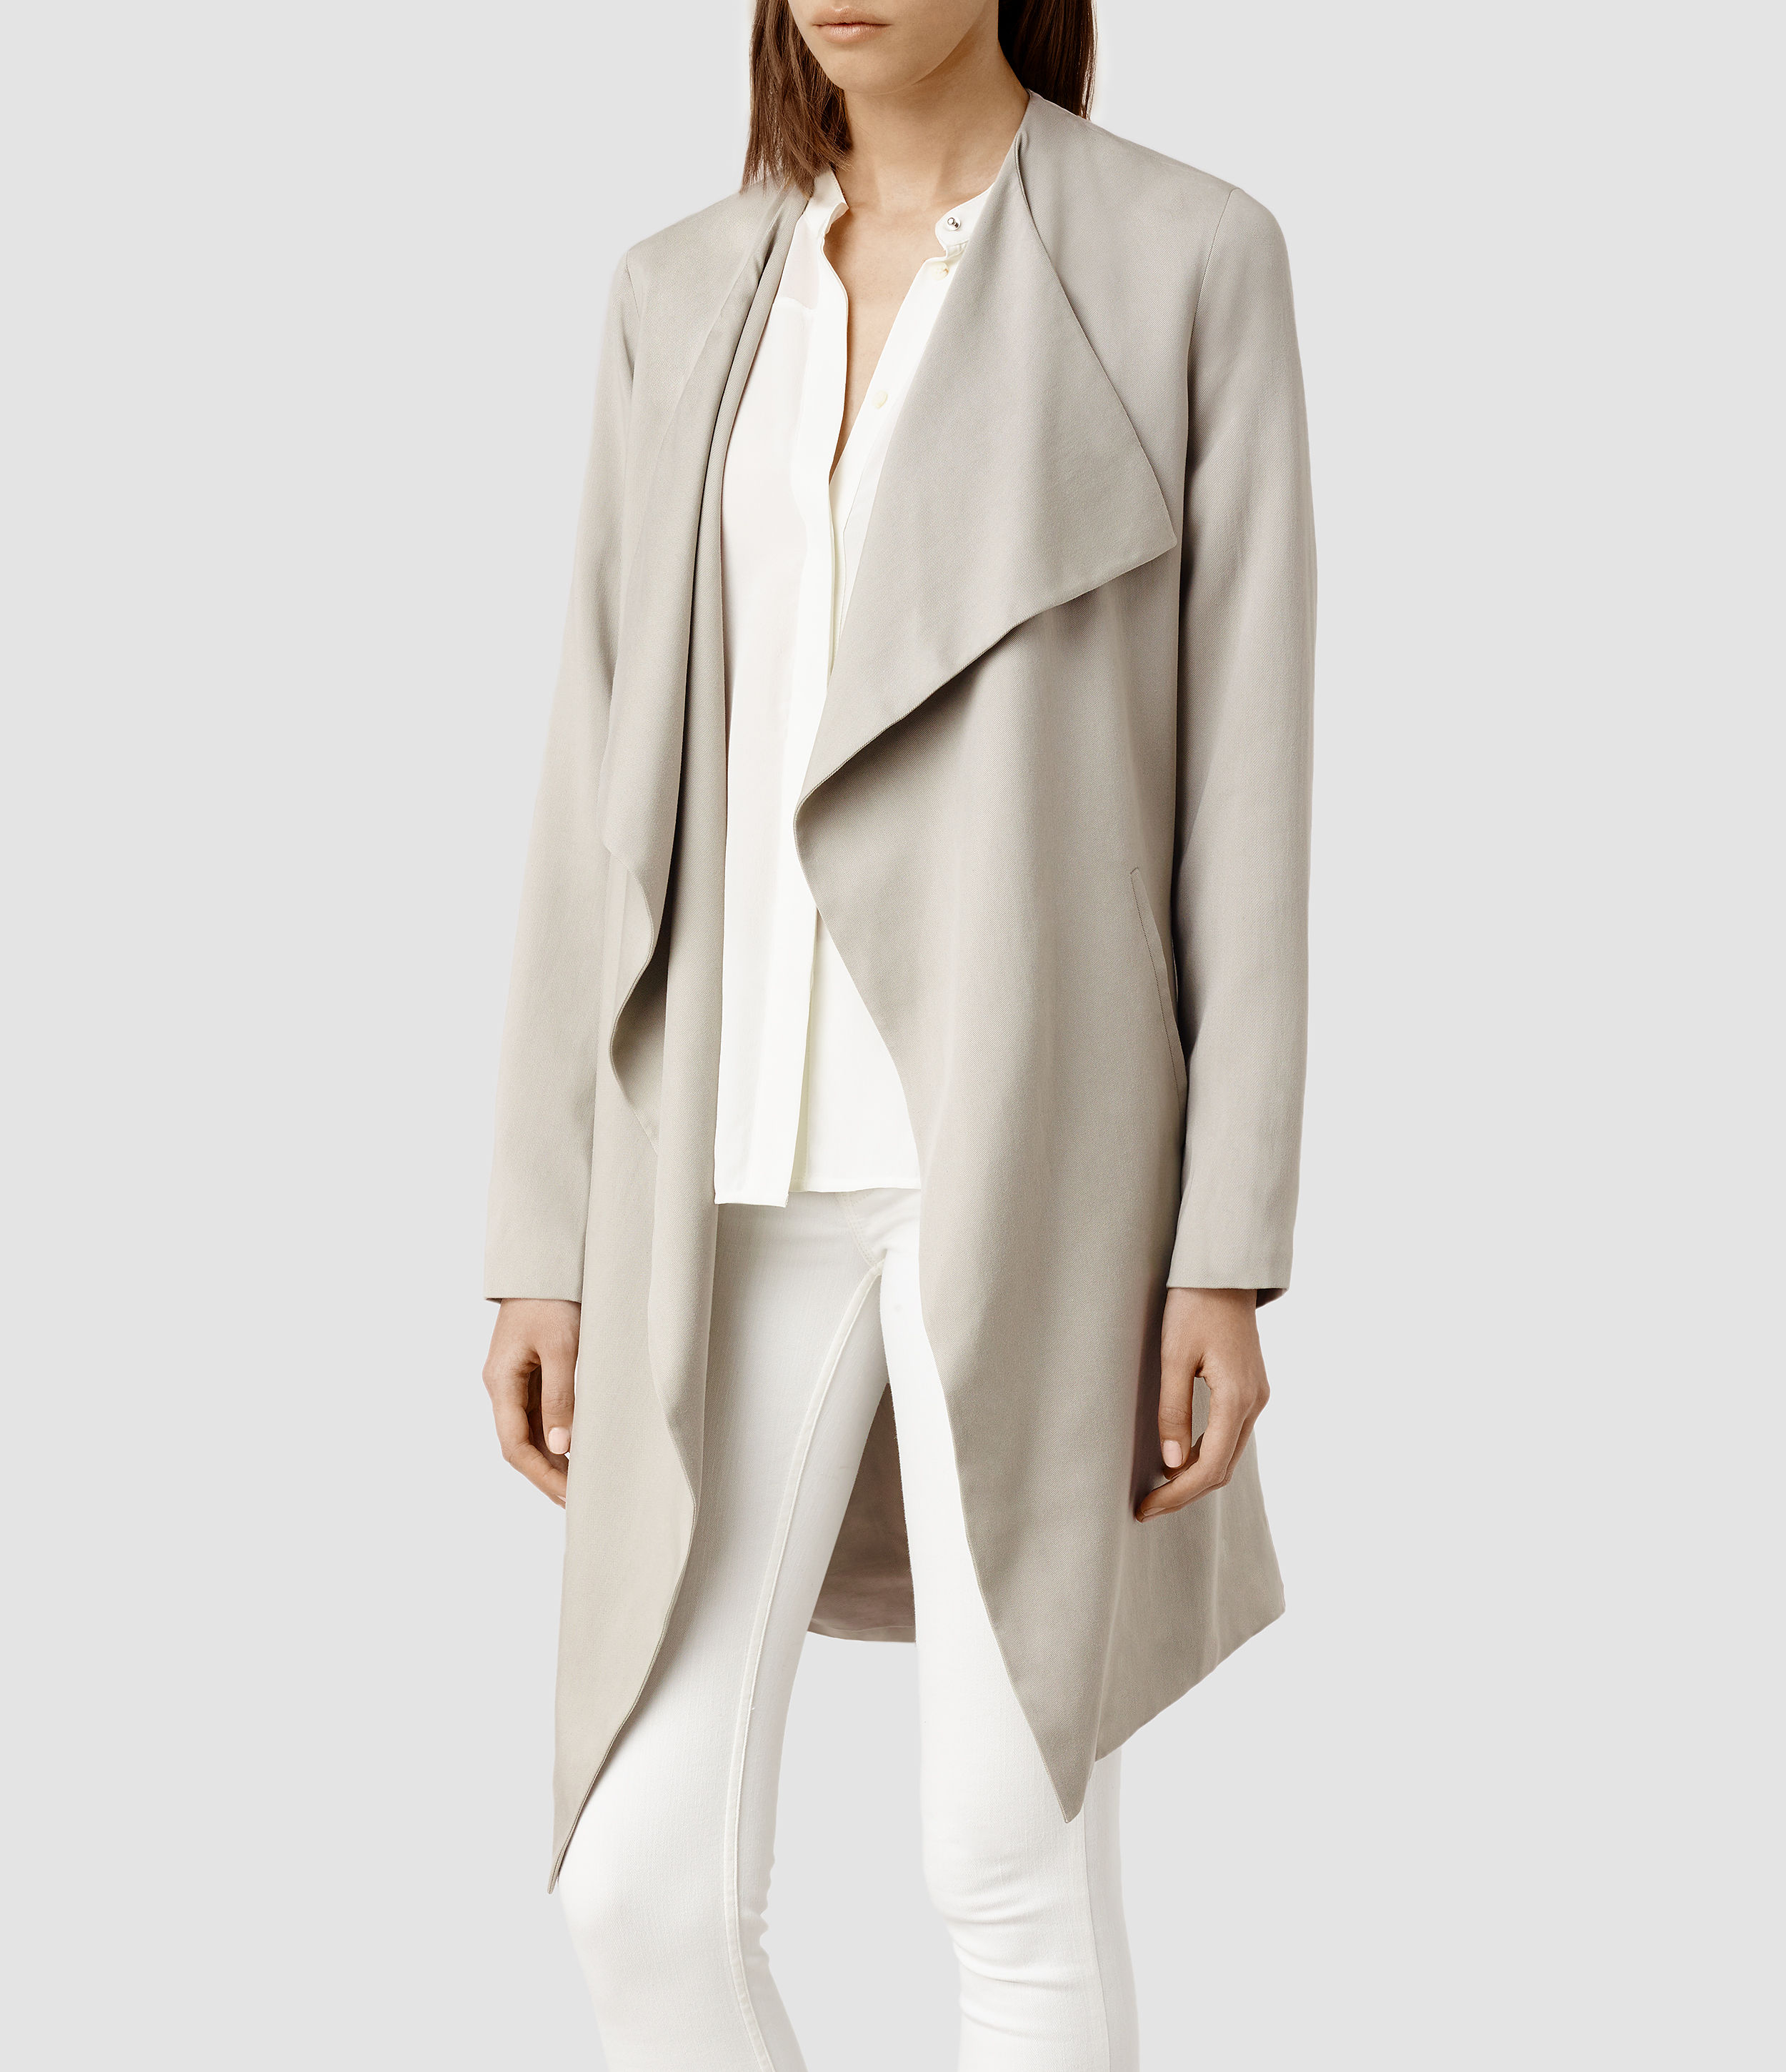 Lyst - AllSaints Hace Trench Coat in Gray